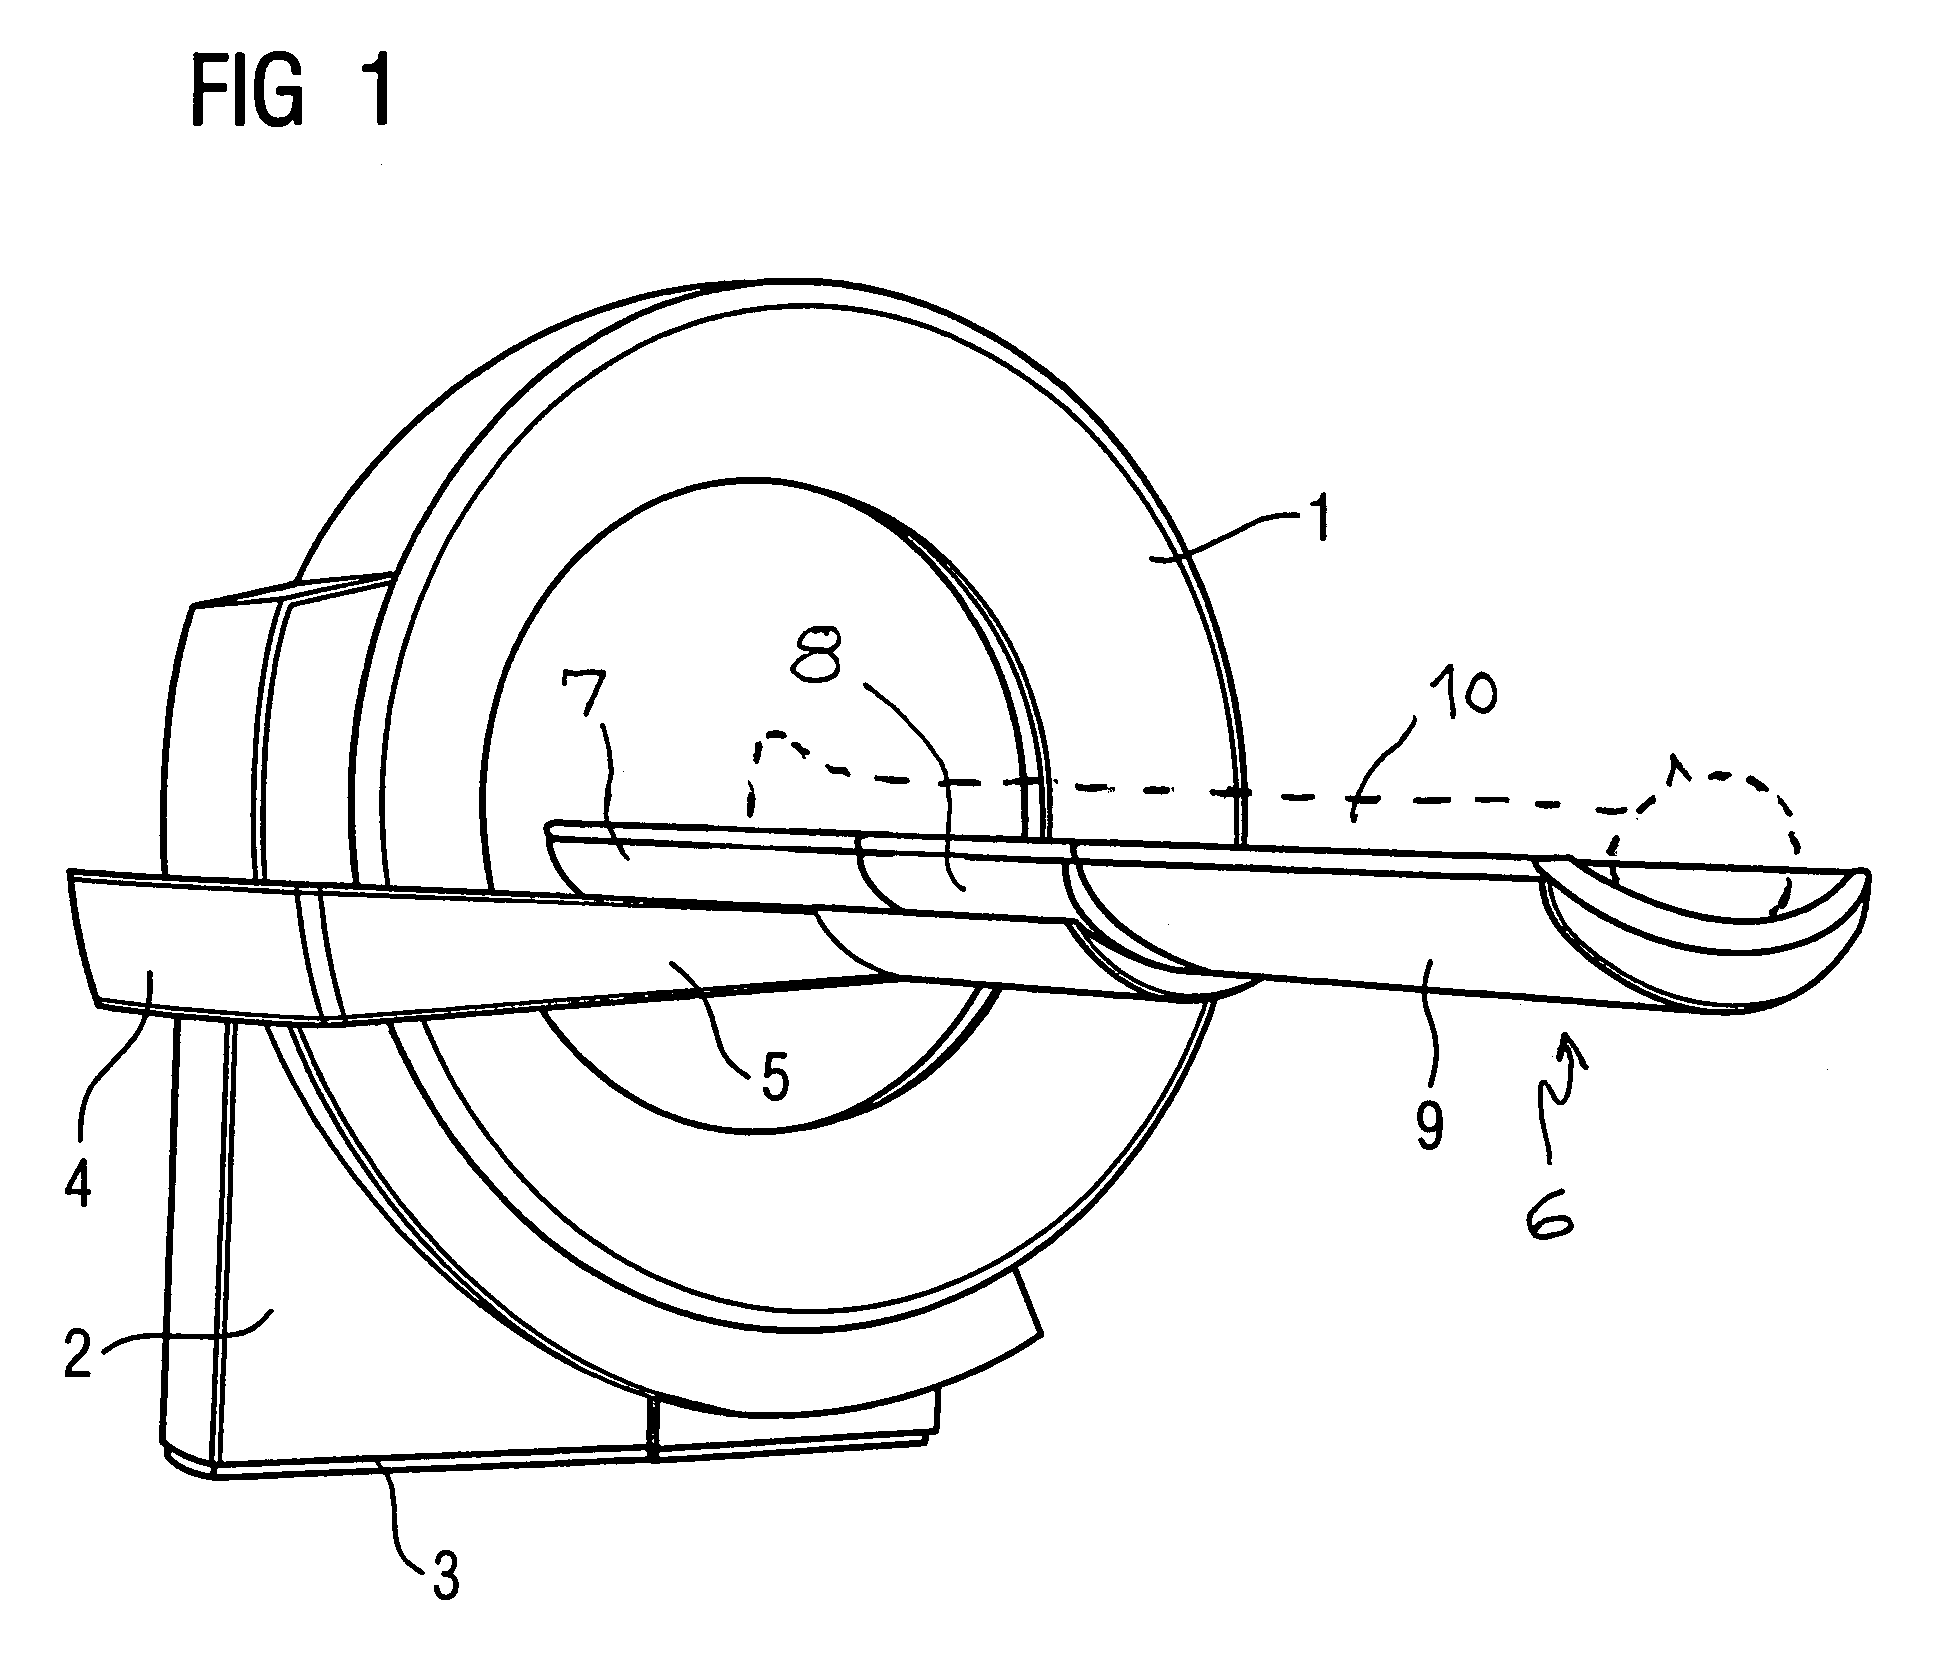 Imaging tomography apparatus having an attached patient support with a movable backrest